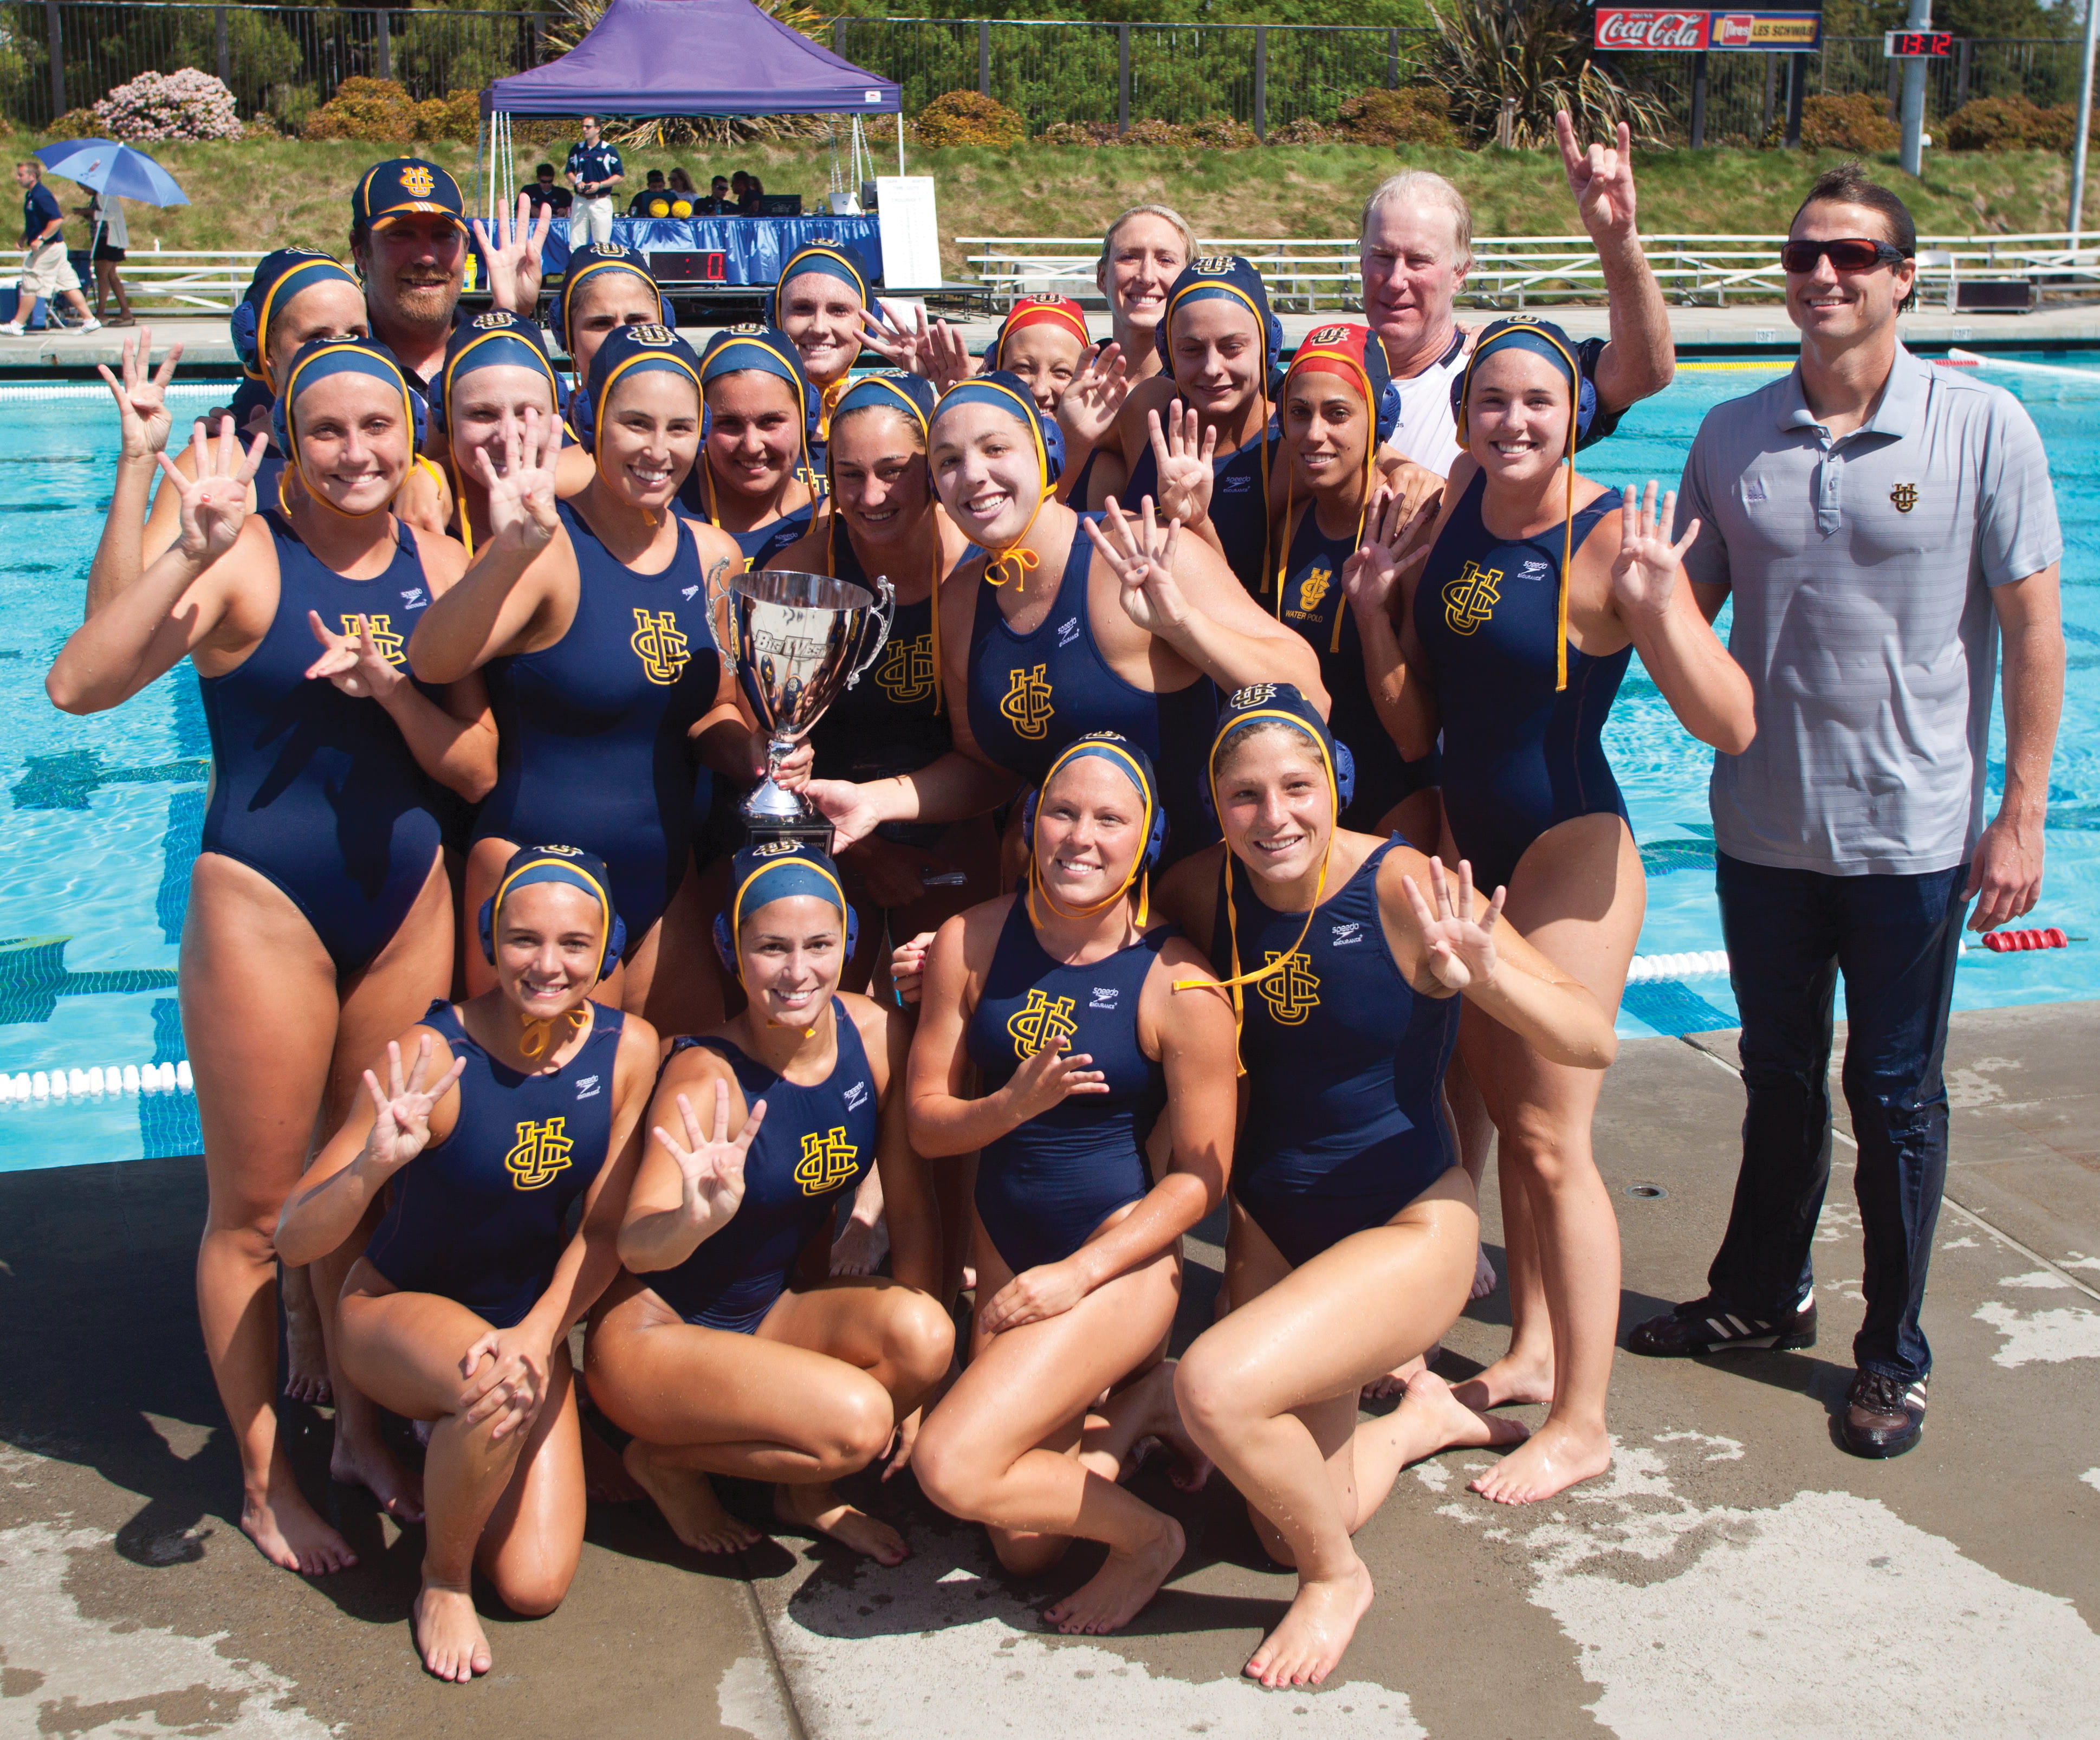 The 2012 UCI women's water polo team